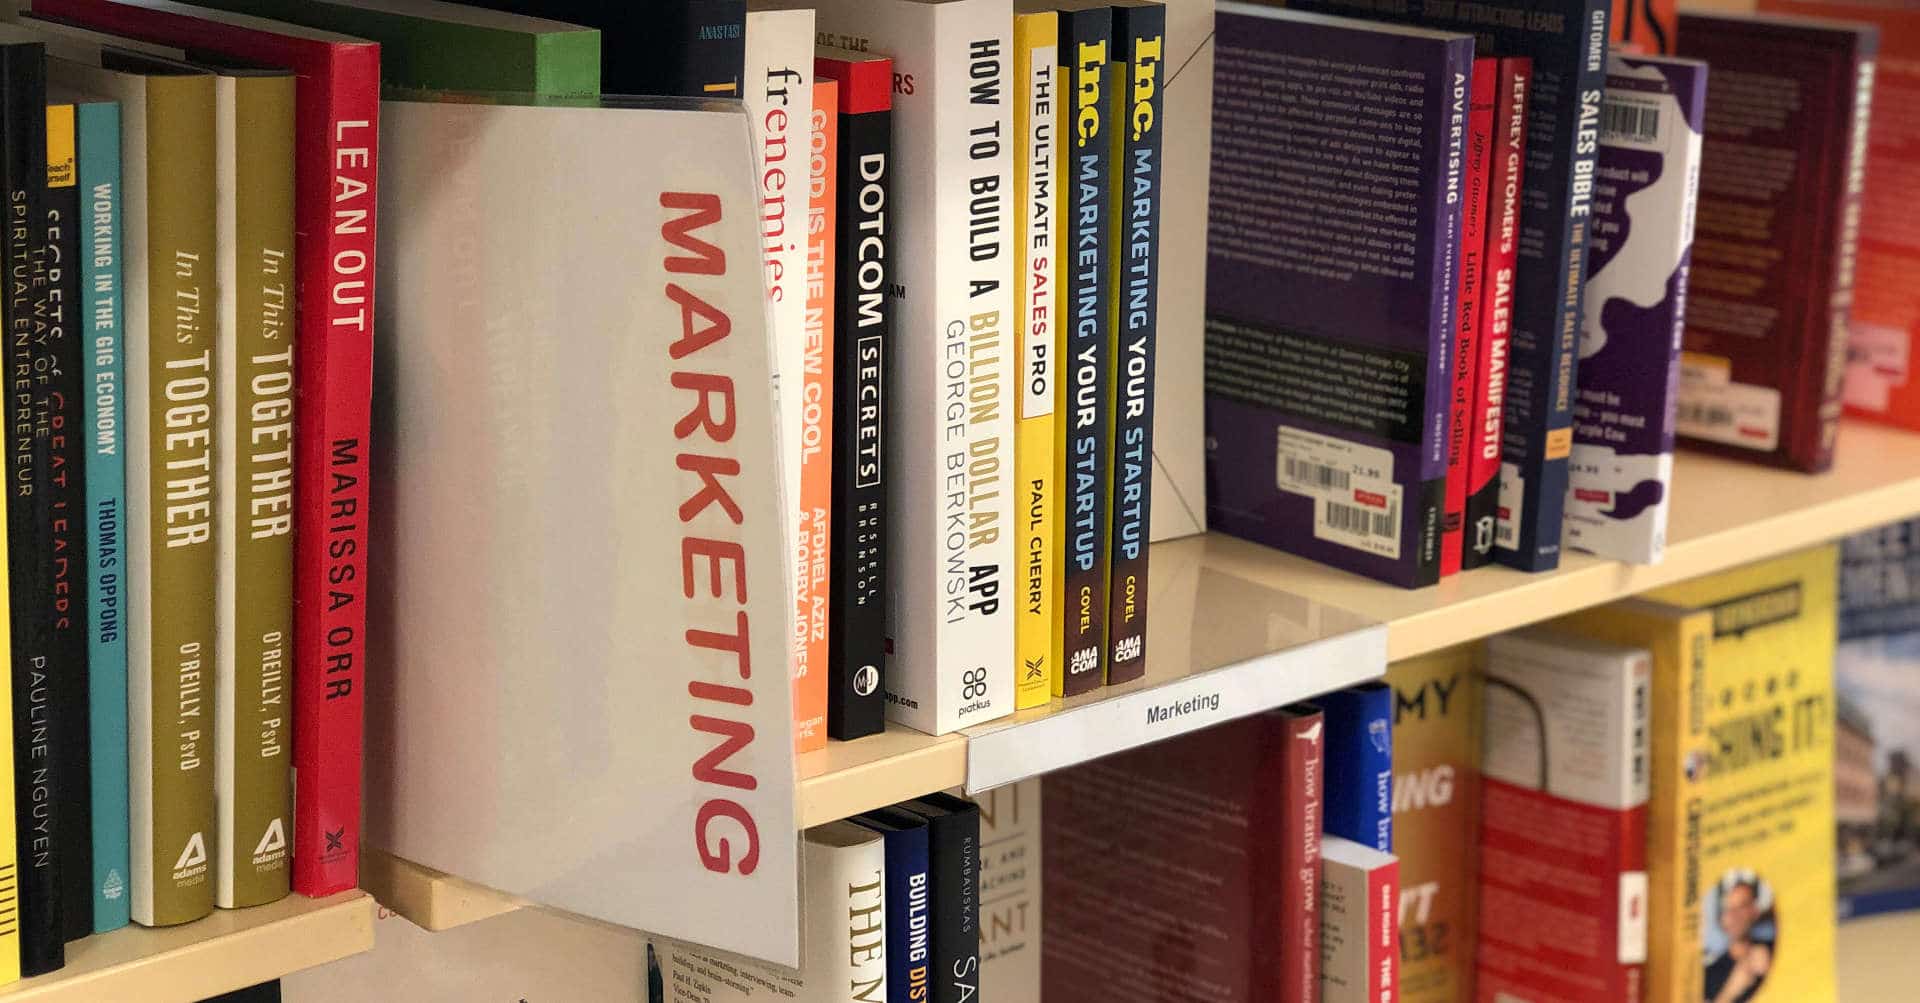 Marketing books by Steve Davis. Does the world need more marketing content